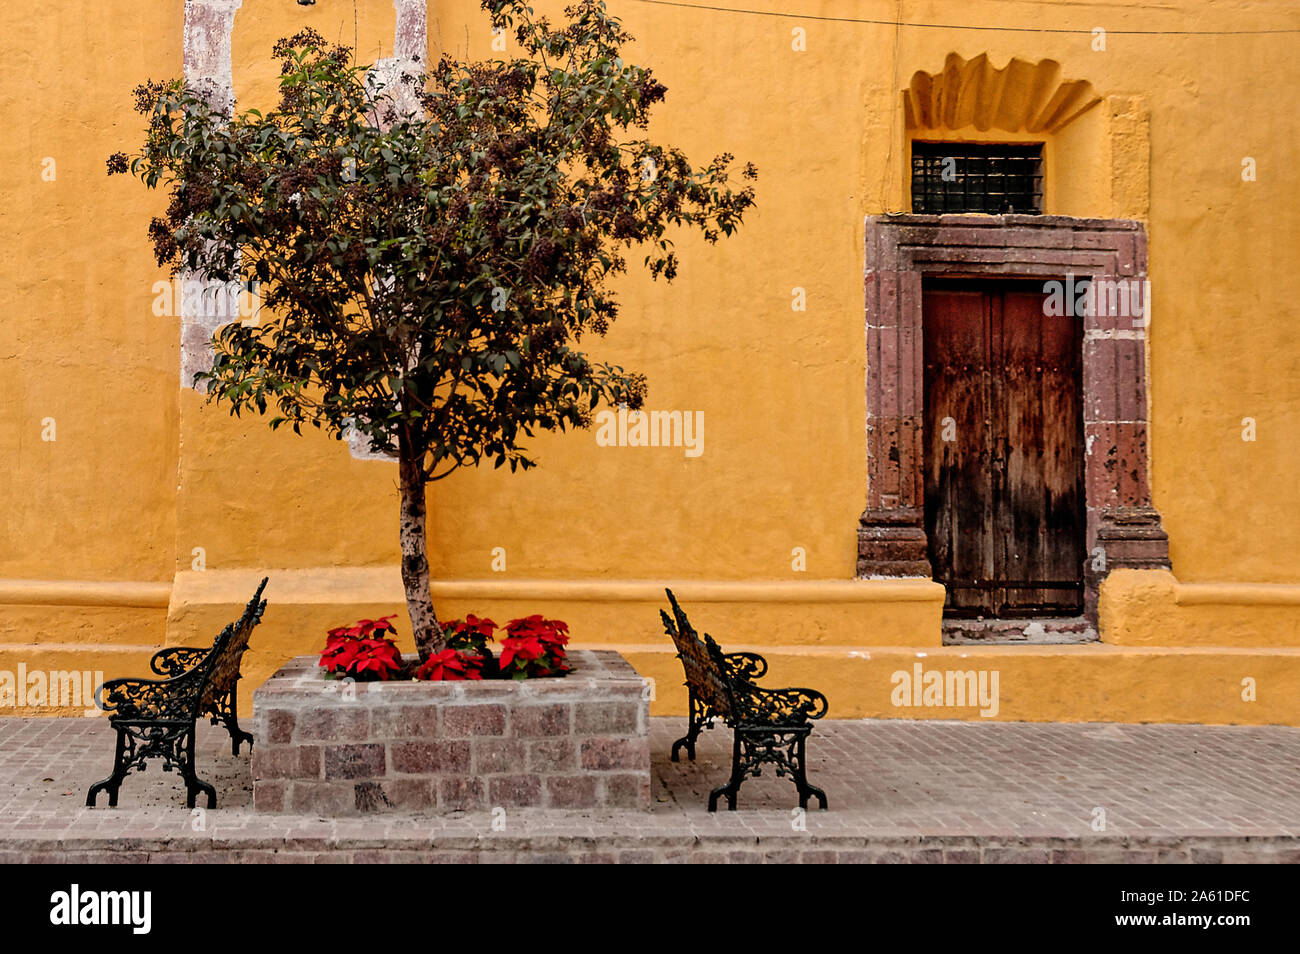 San Miguel de Allende, Guanajuato, Mexico -  December 4, 2004: Architectural detail of downtown buildings and houses Stock Photo